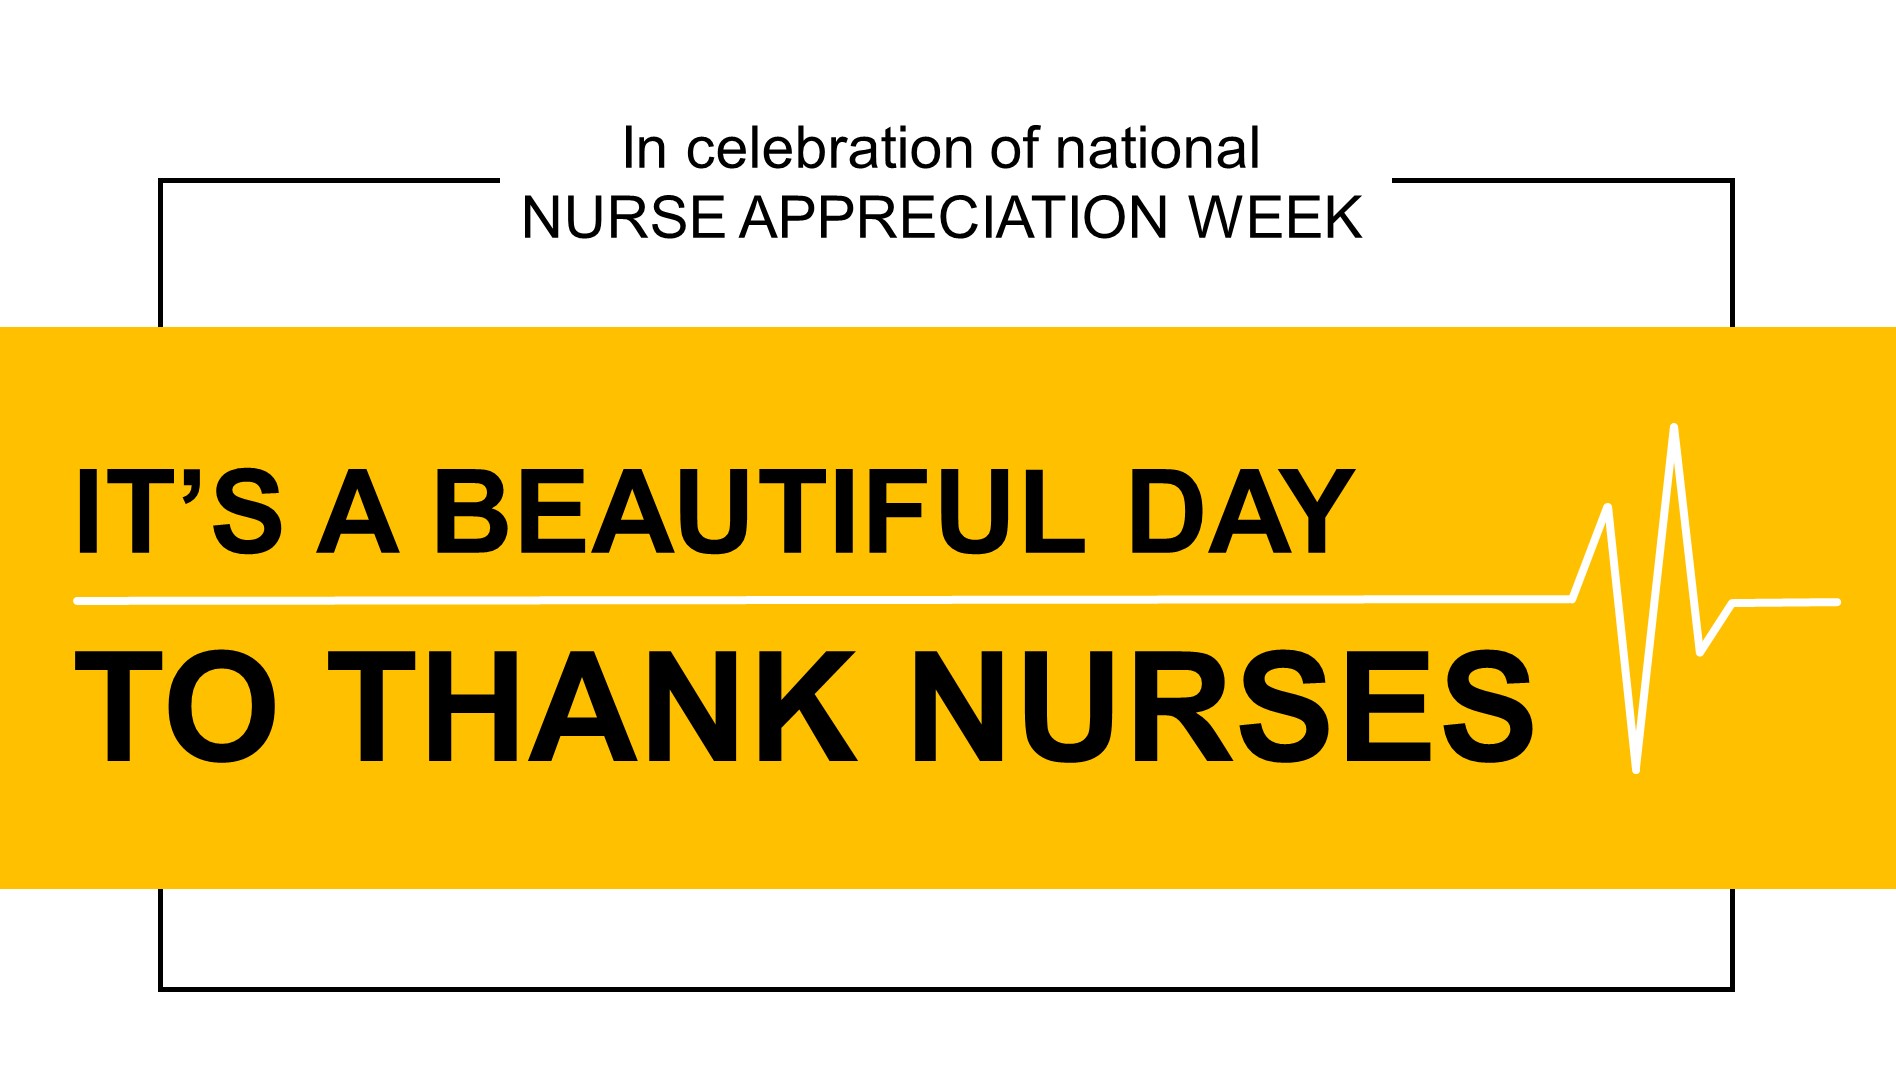 It's a beautiful day to thank nurses